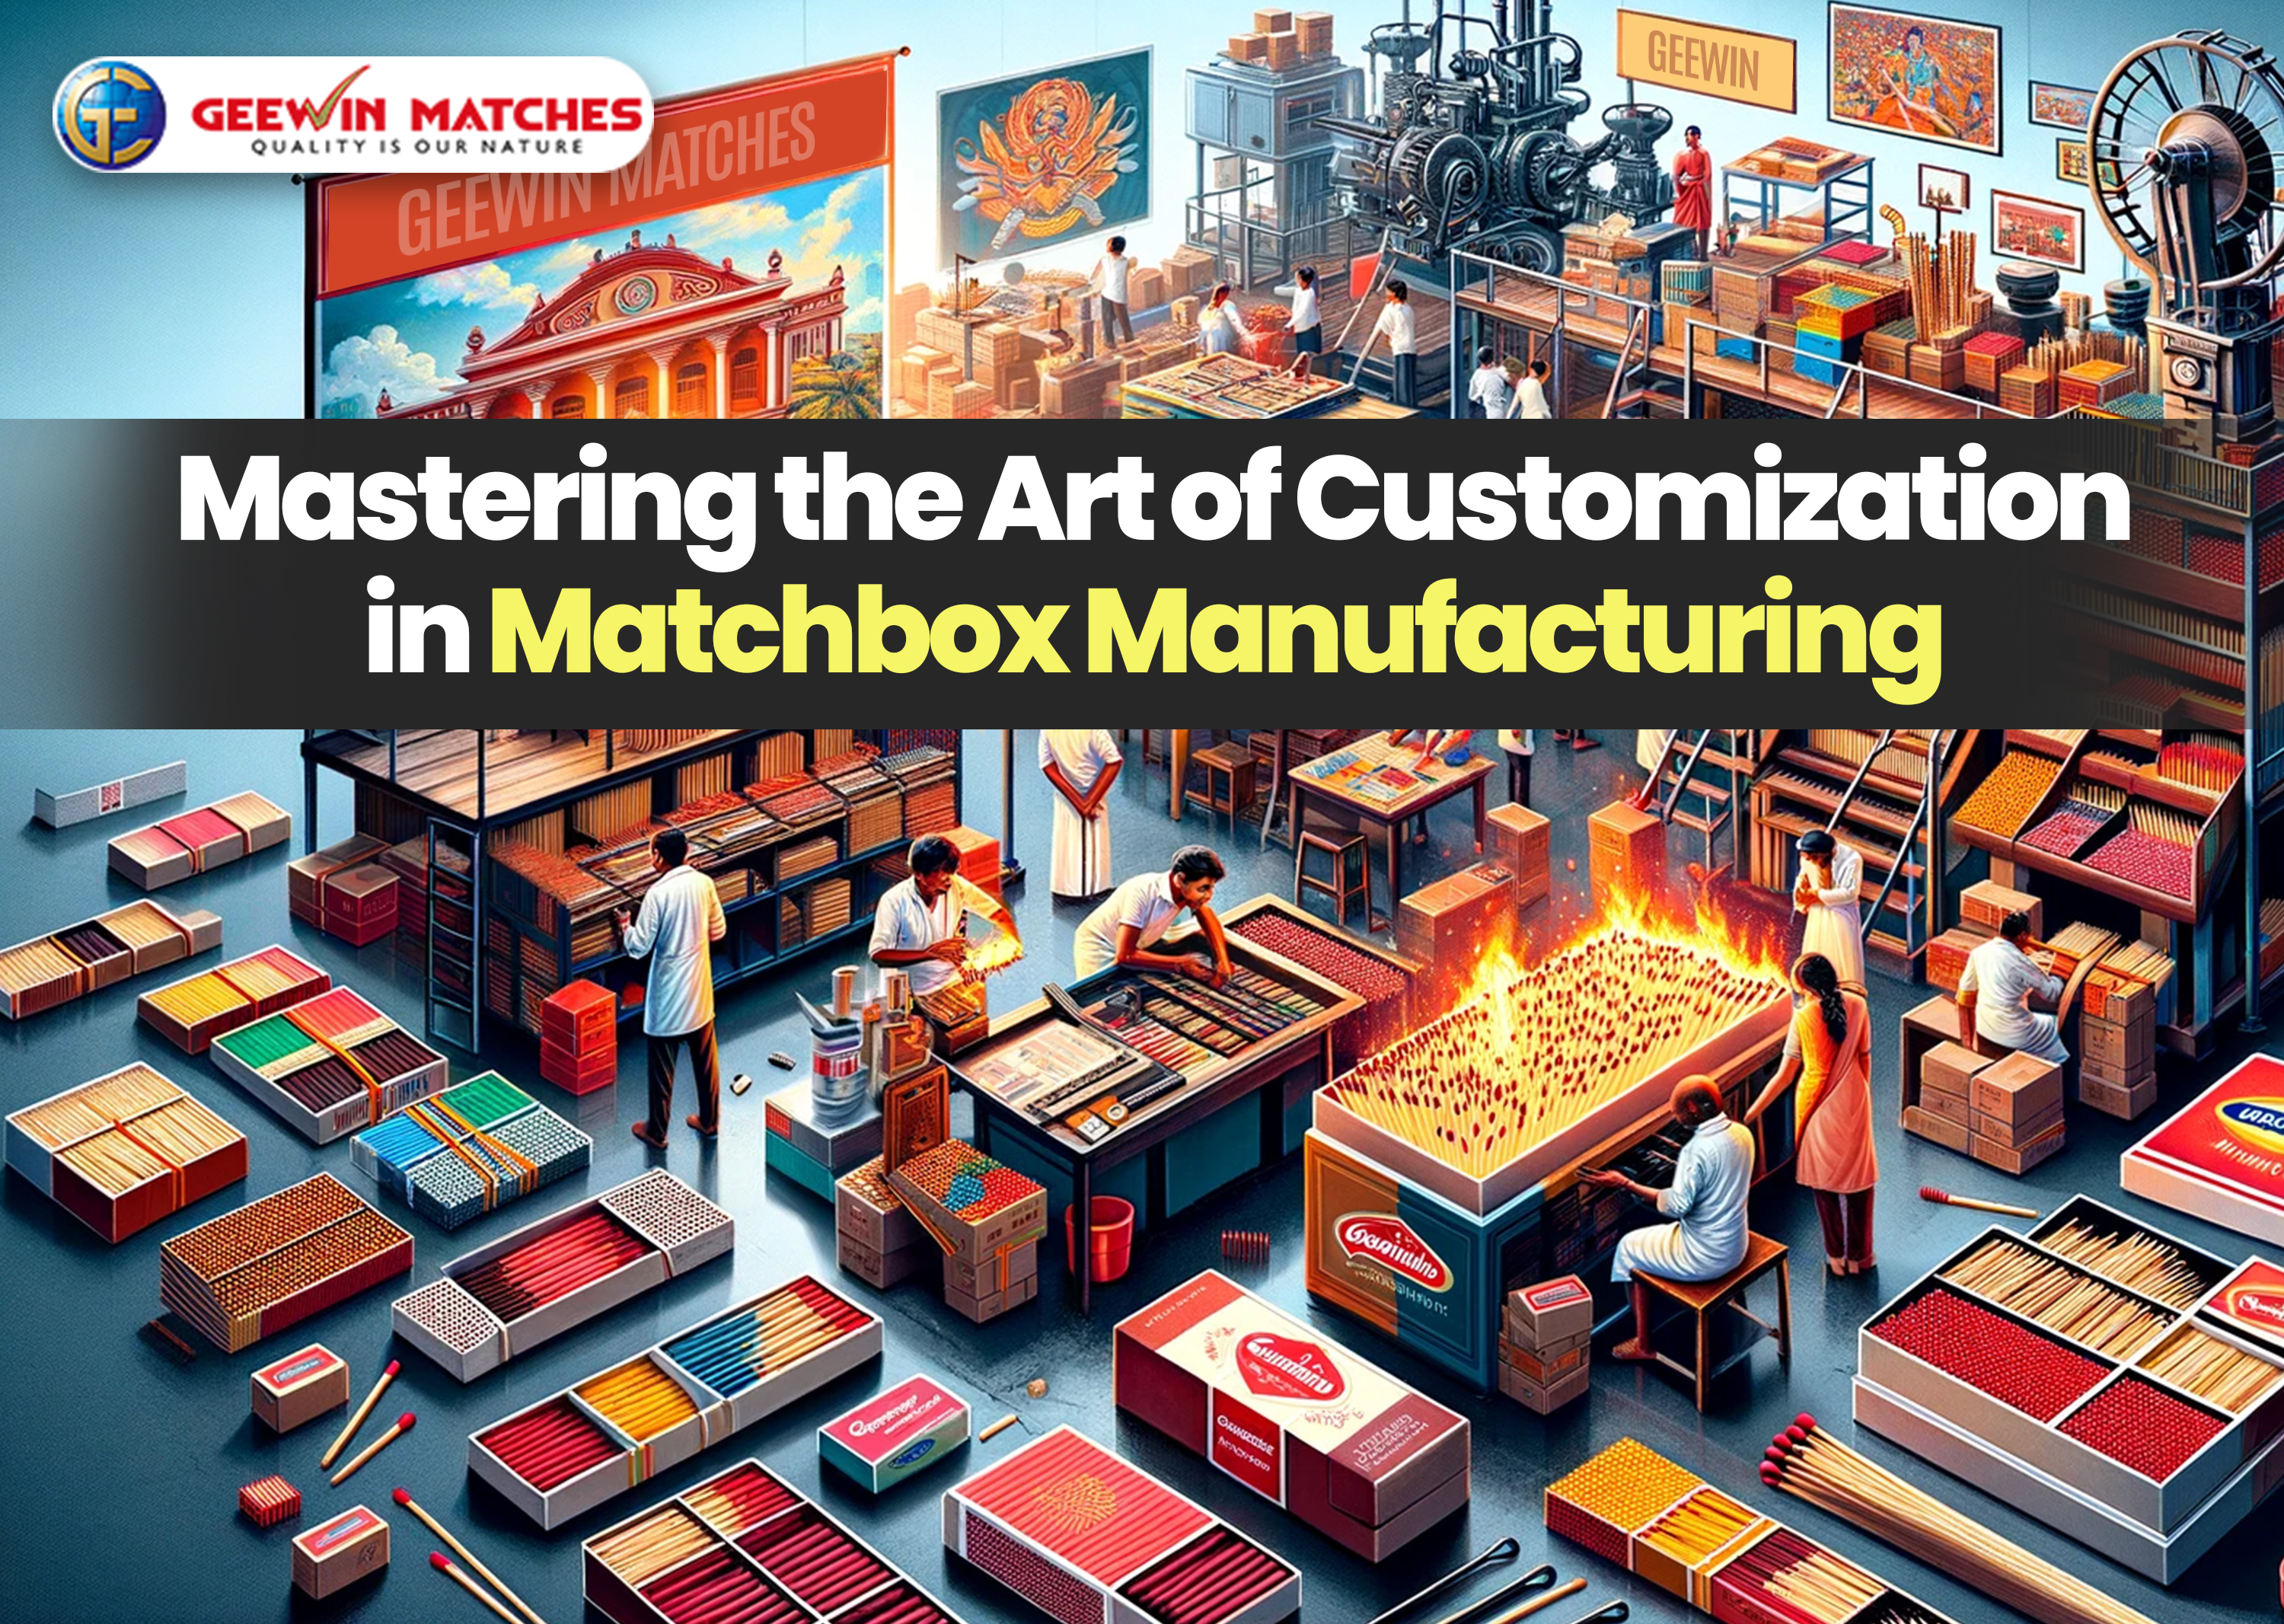 Geewin Matches: Mastering the Art of Customization in Matchbox Manufacturing